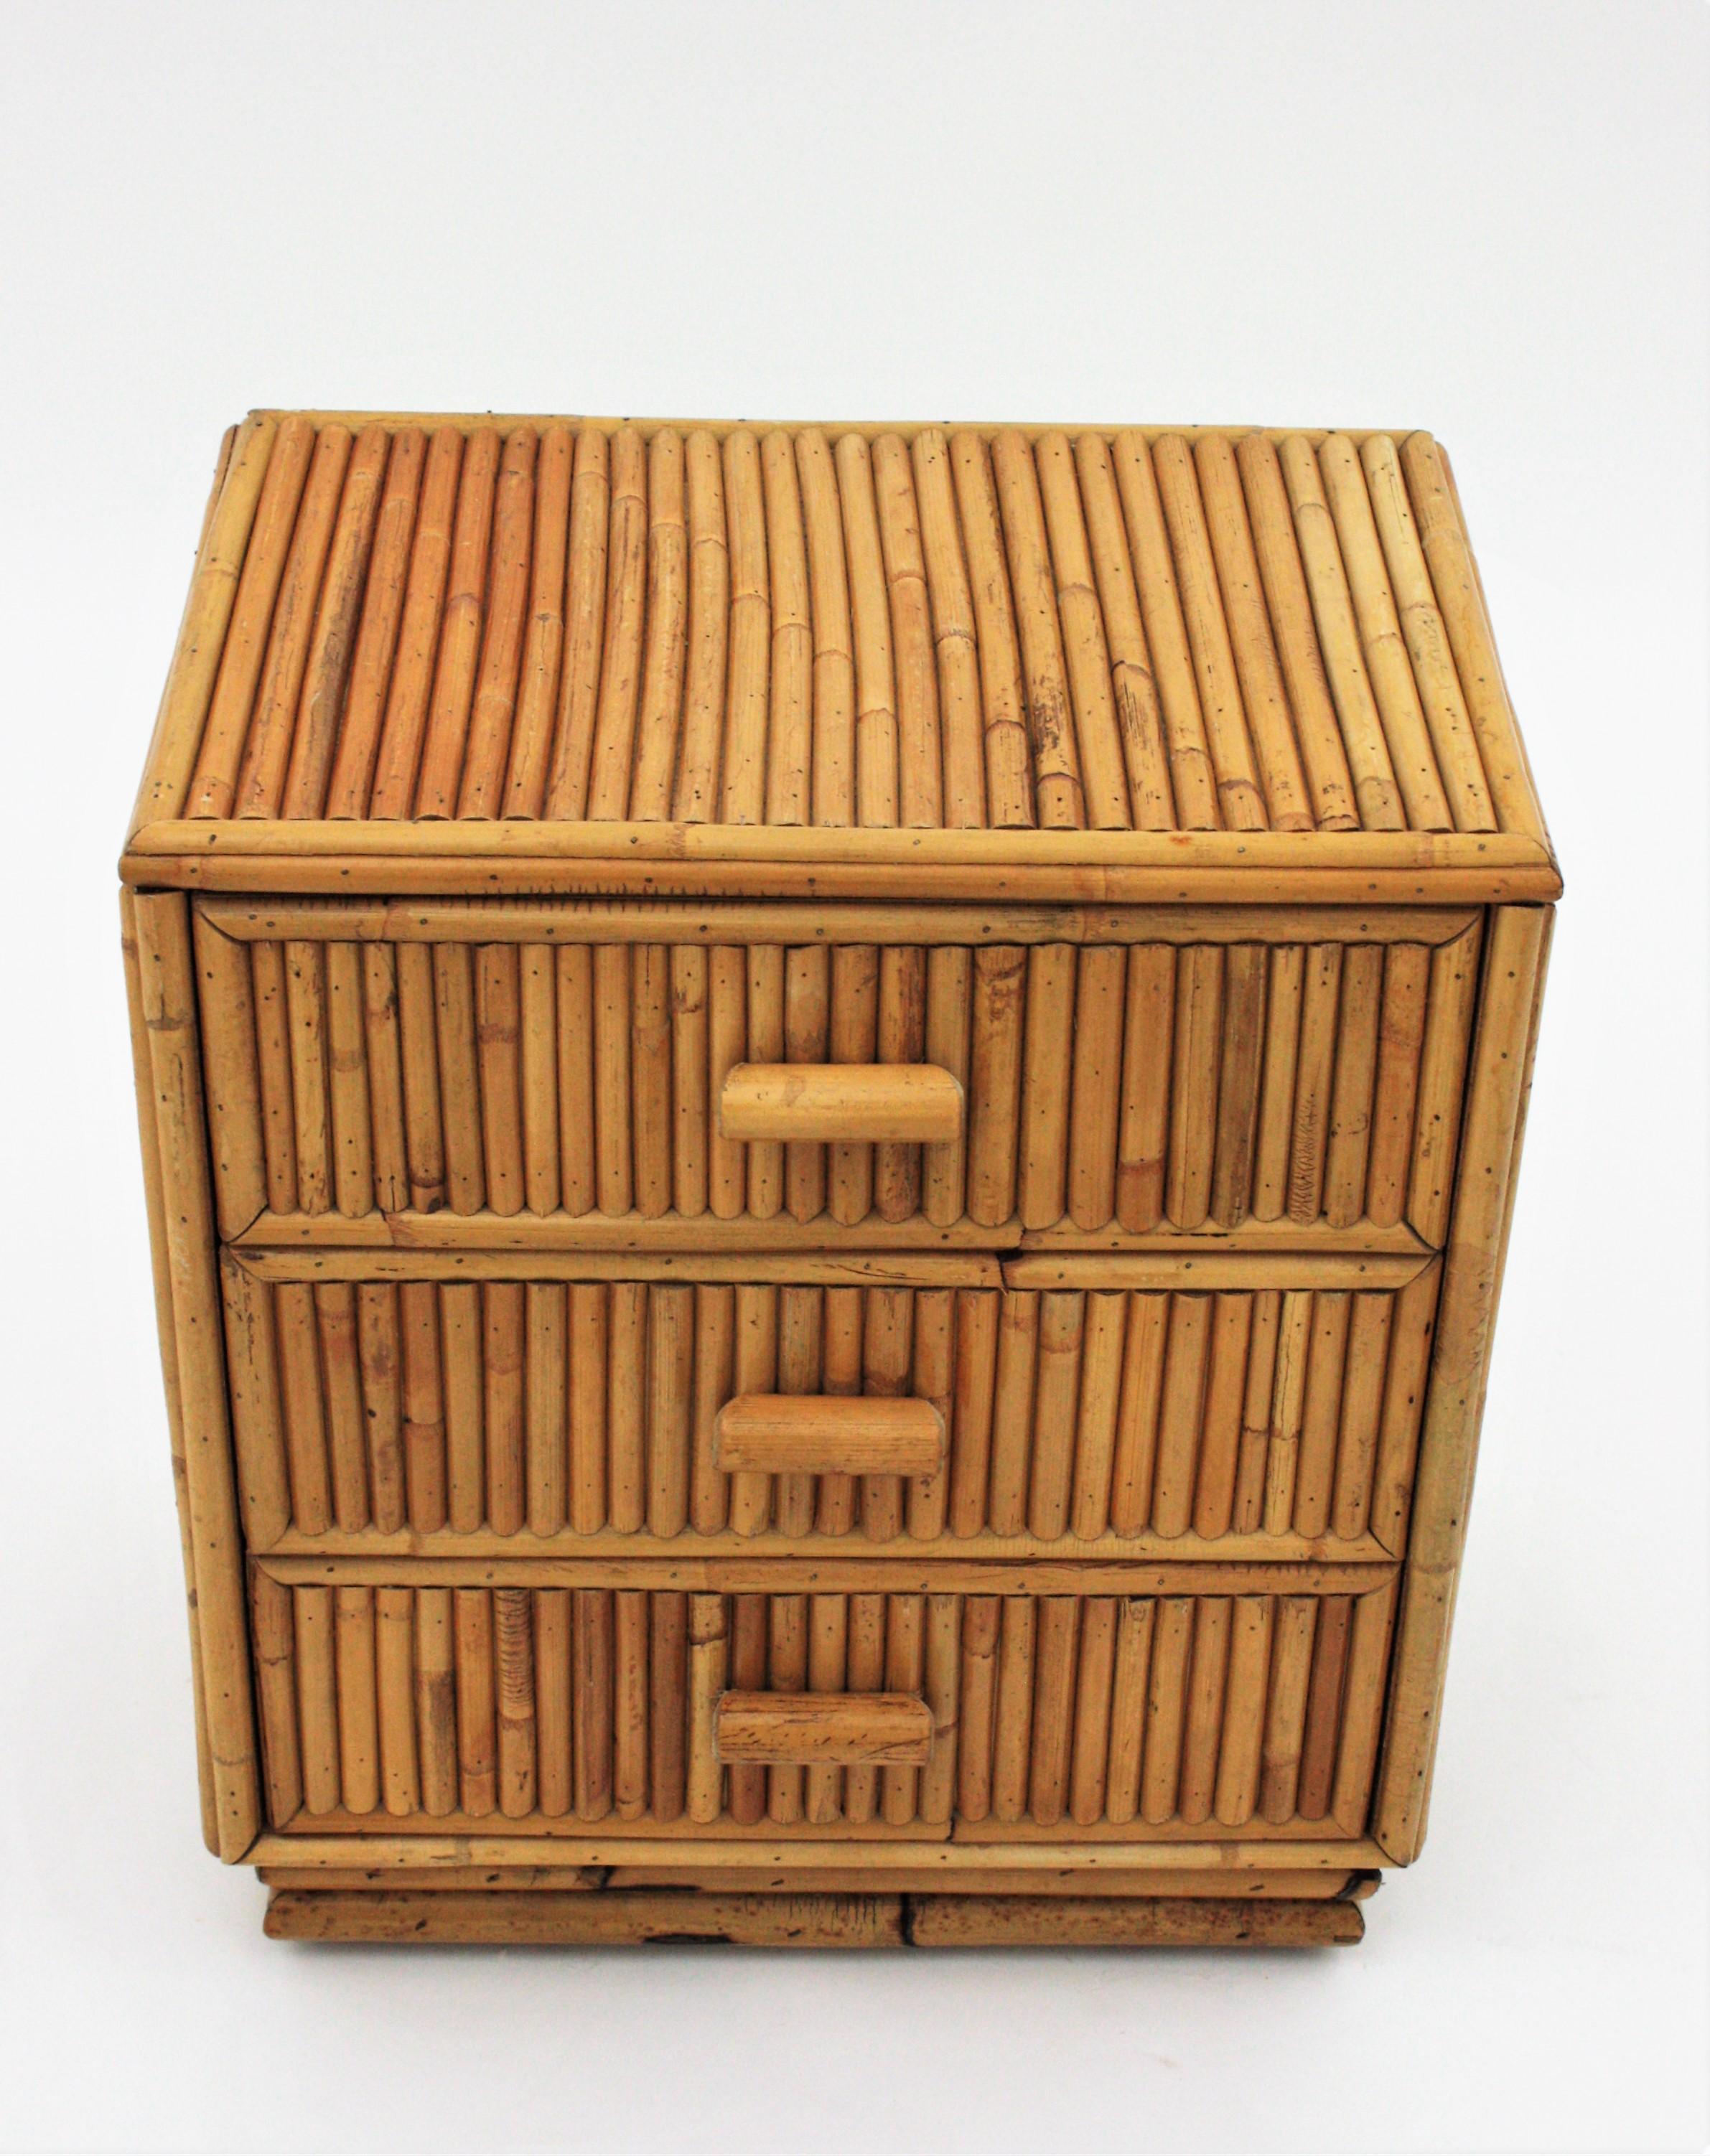 Split Reed Bamboo Rattan Small Chest or Nightstand, 1970s For Sale 4